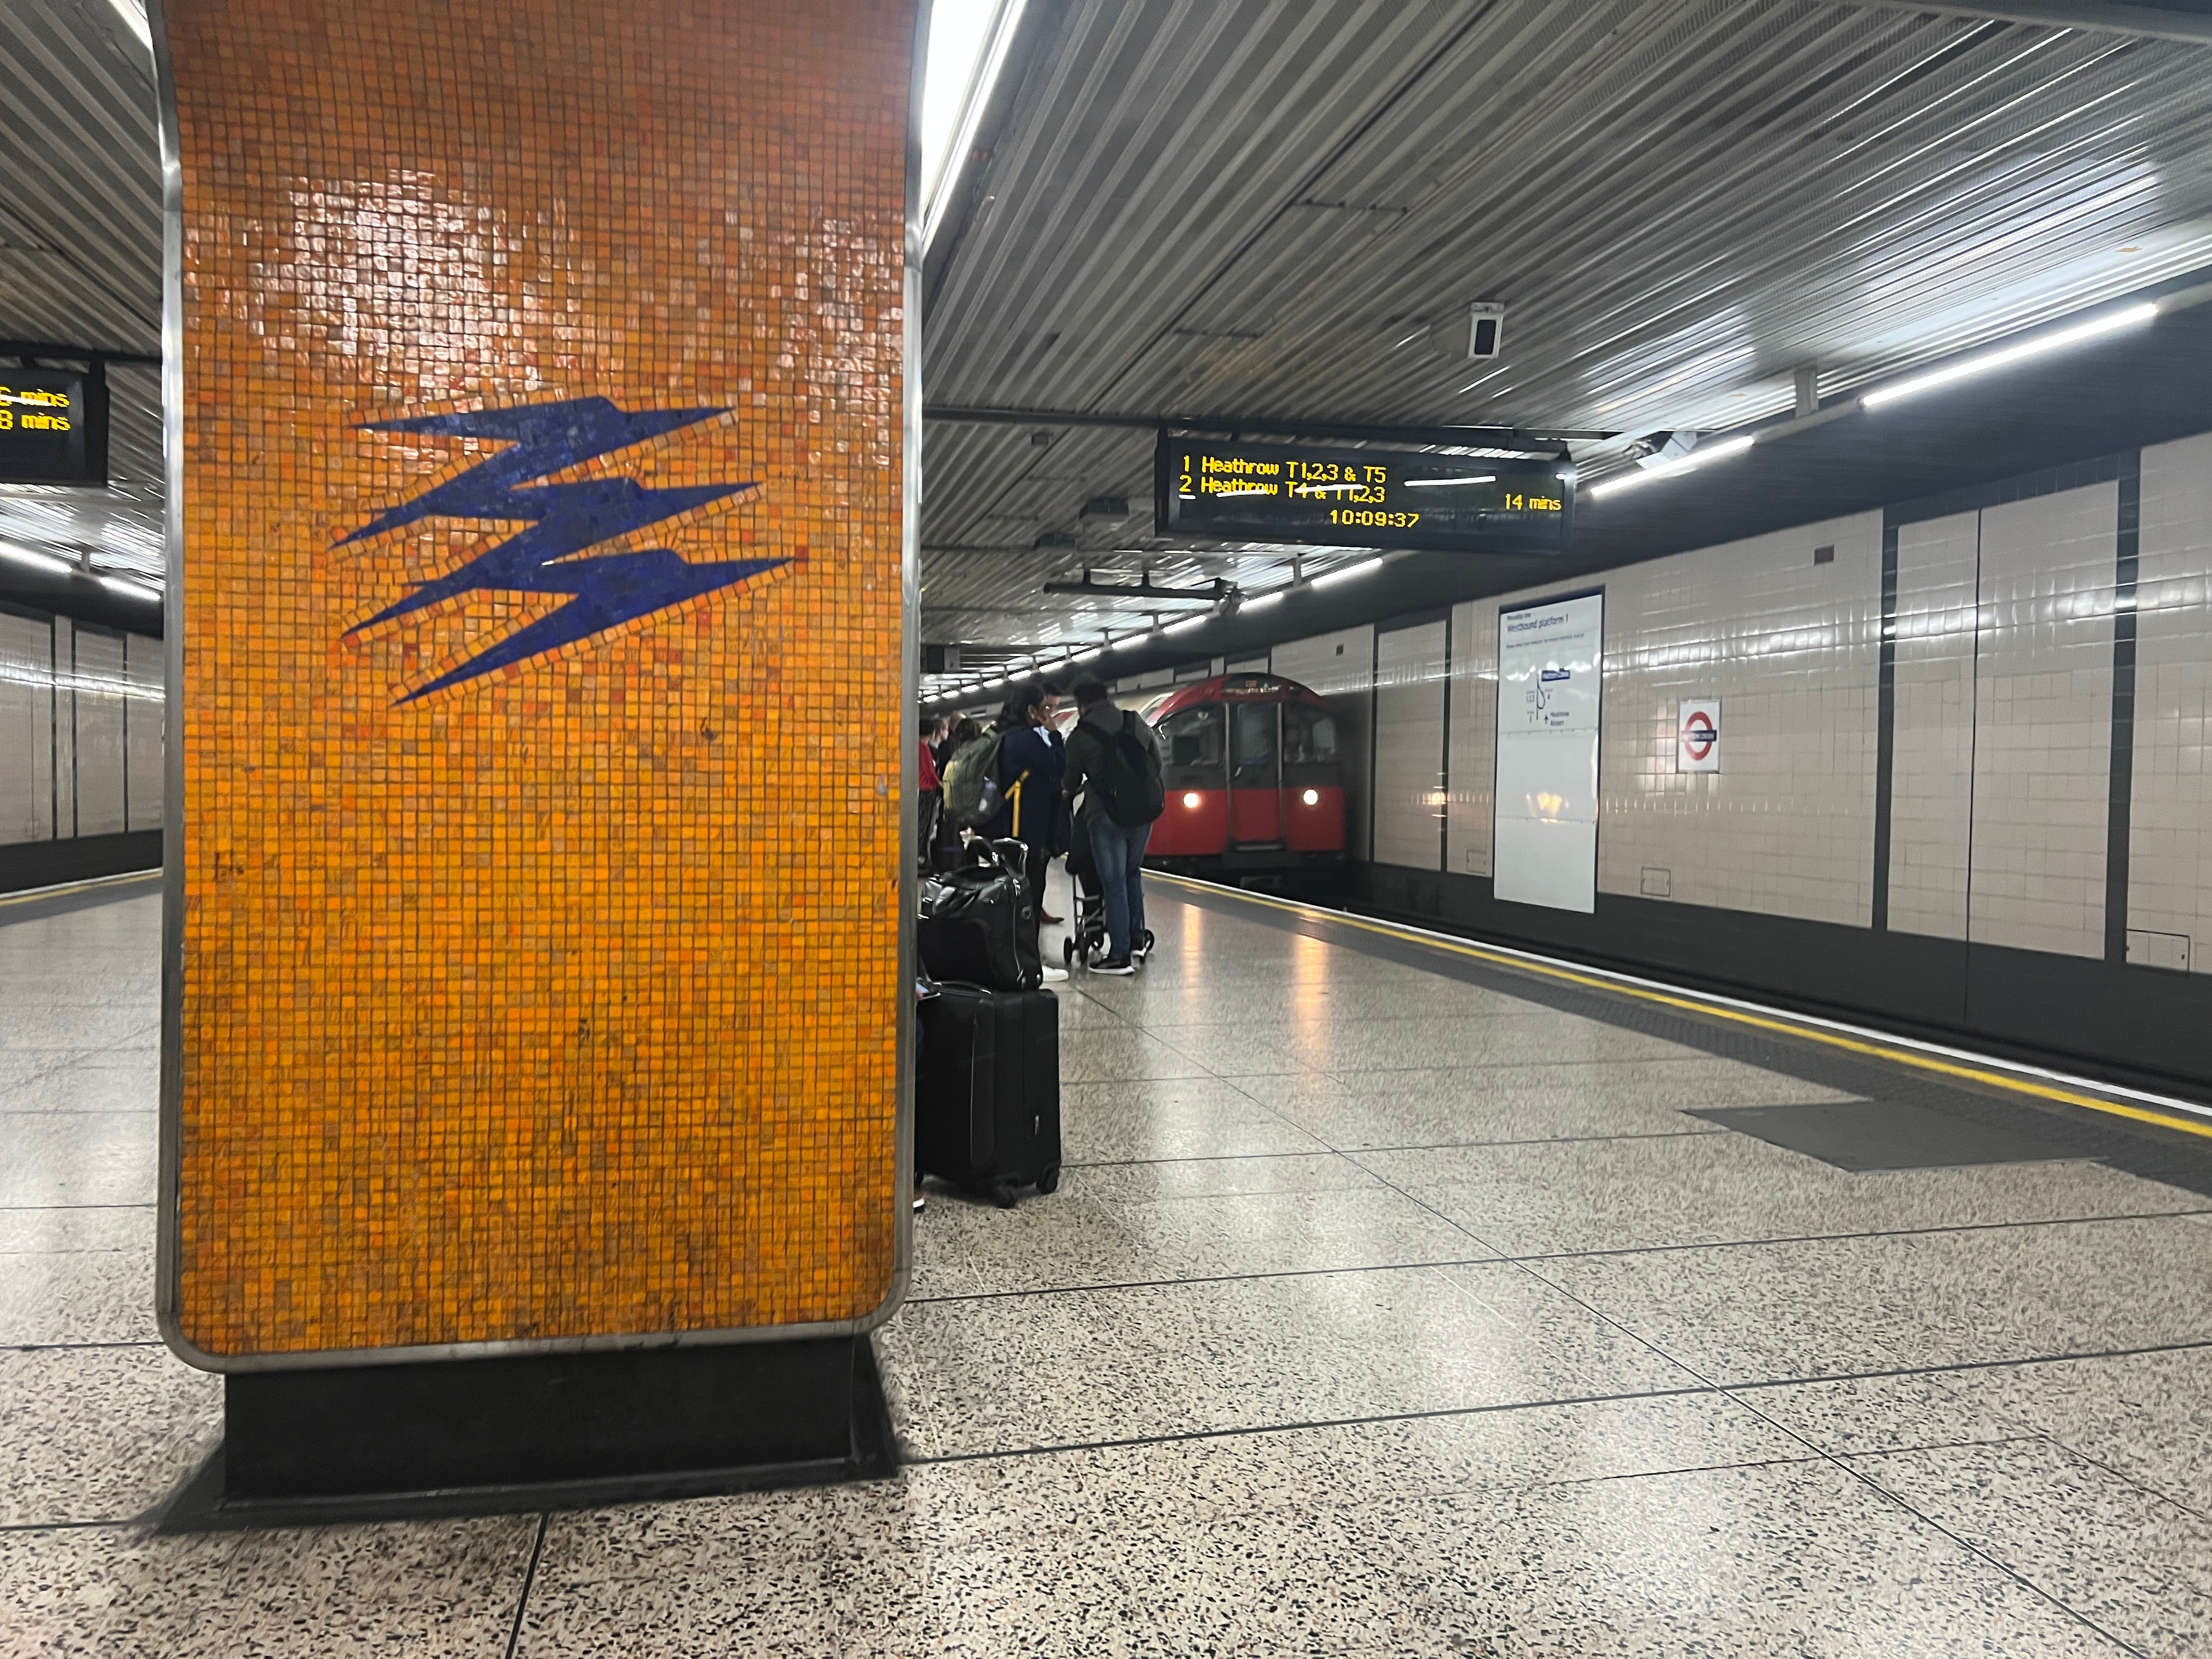 Where travel dreams go to die: Hatton Cross station on the Piccadilly Line of the London Underground